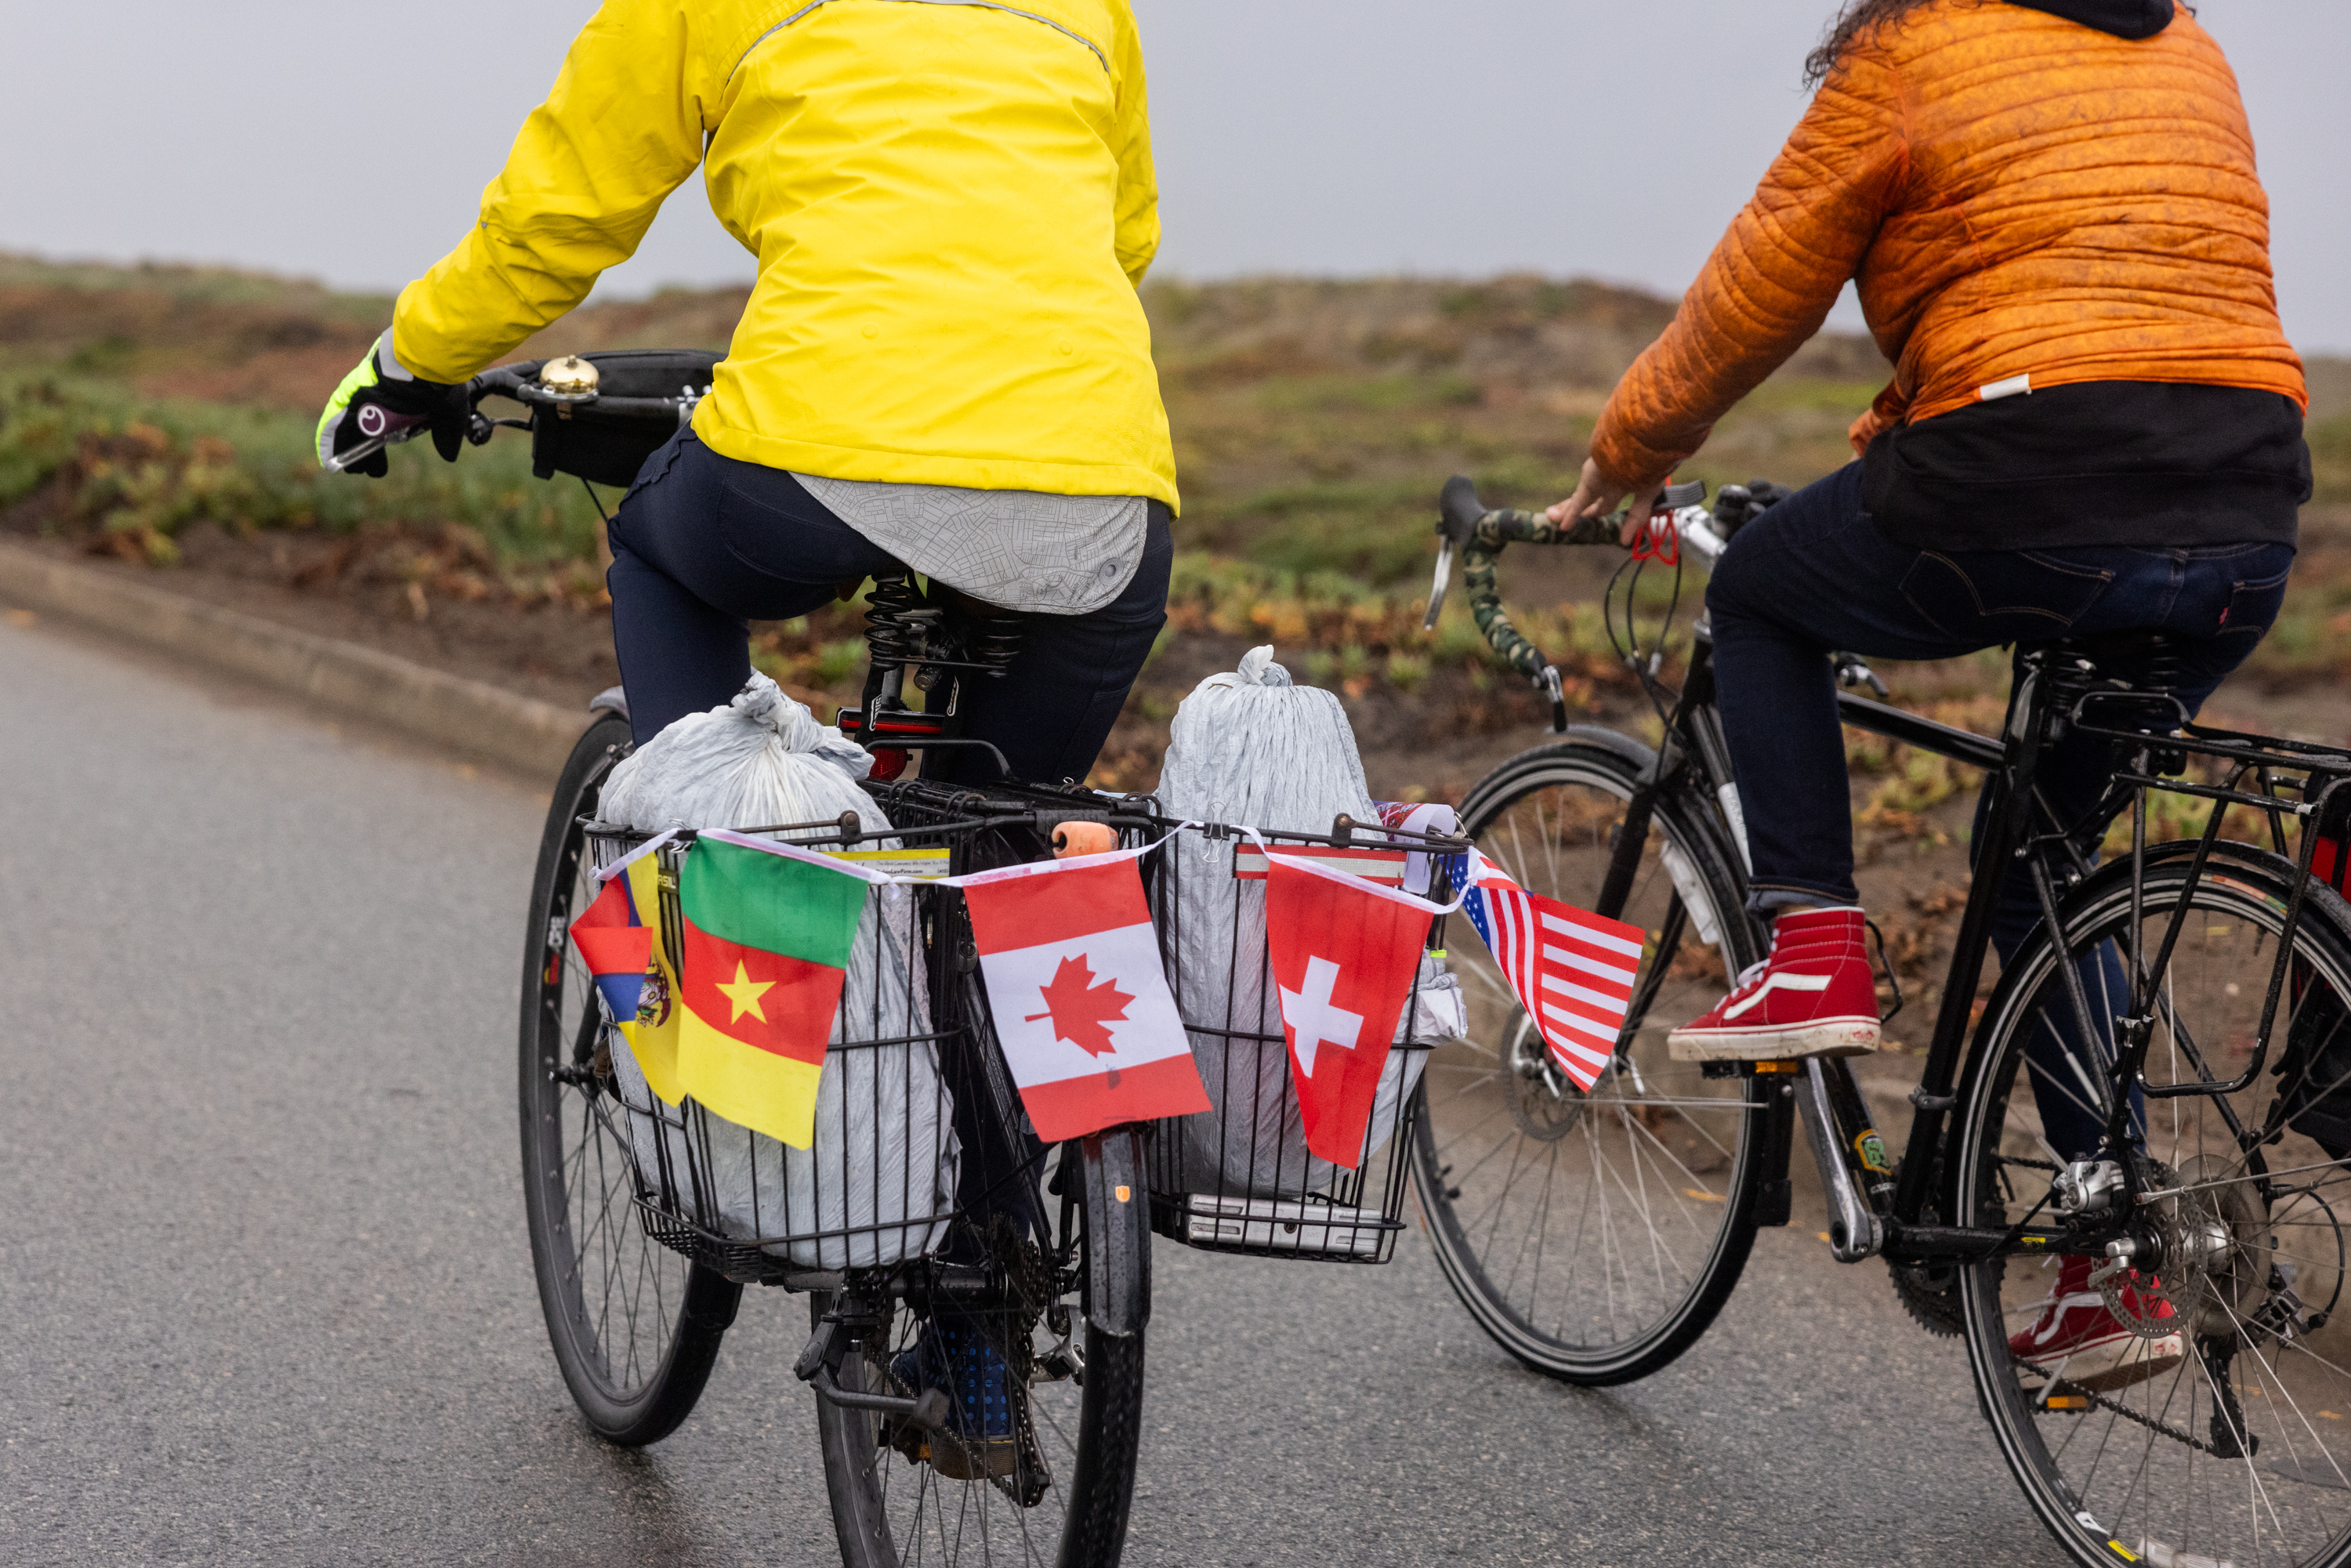 Flags from Cameroon, Canada, Switzerland, and American flag hang on the back of a bicycles carriage in the rain.